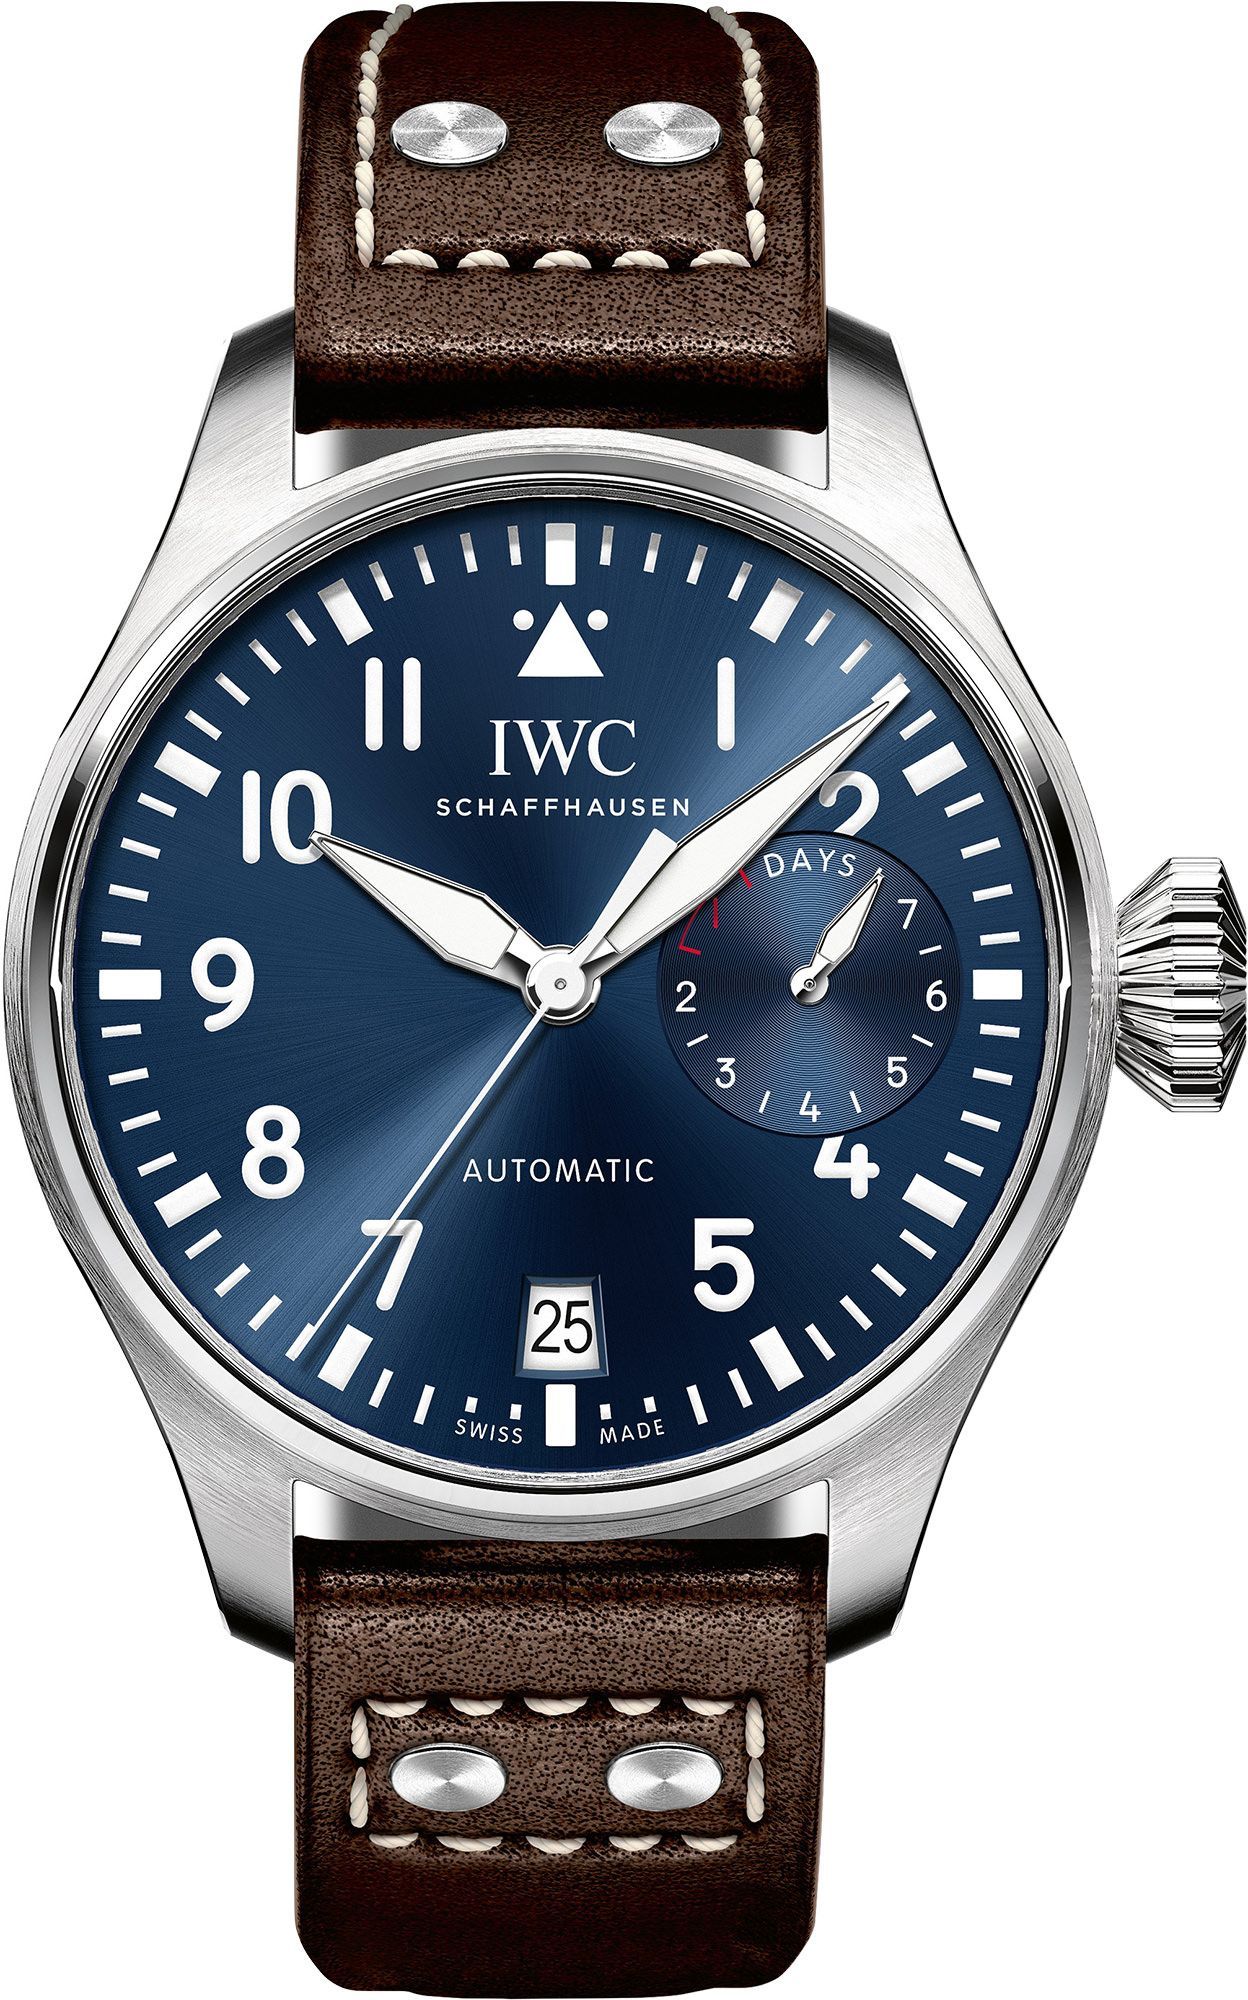 IWC Le Petit Prince 46 mm Watch in Blue Dial For Men - 1